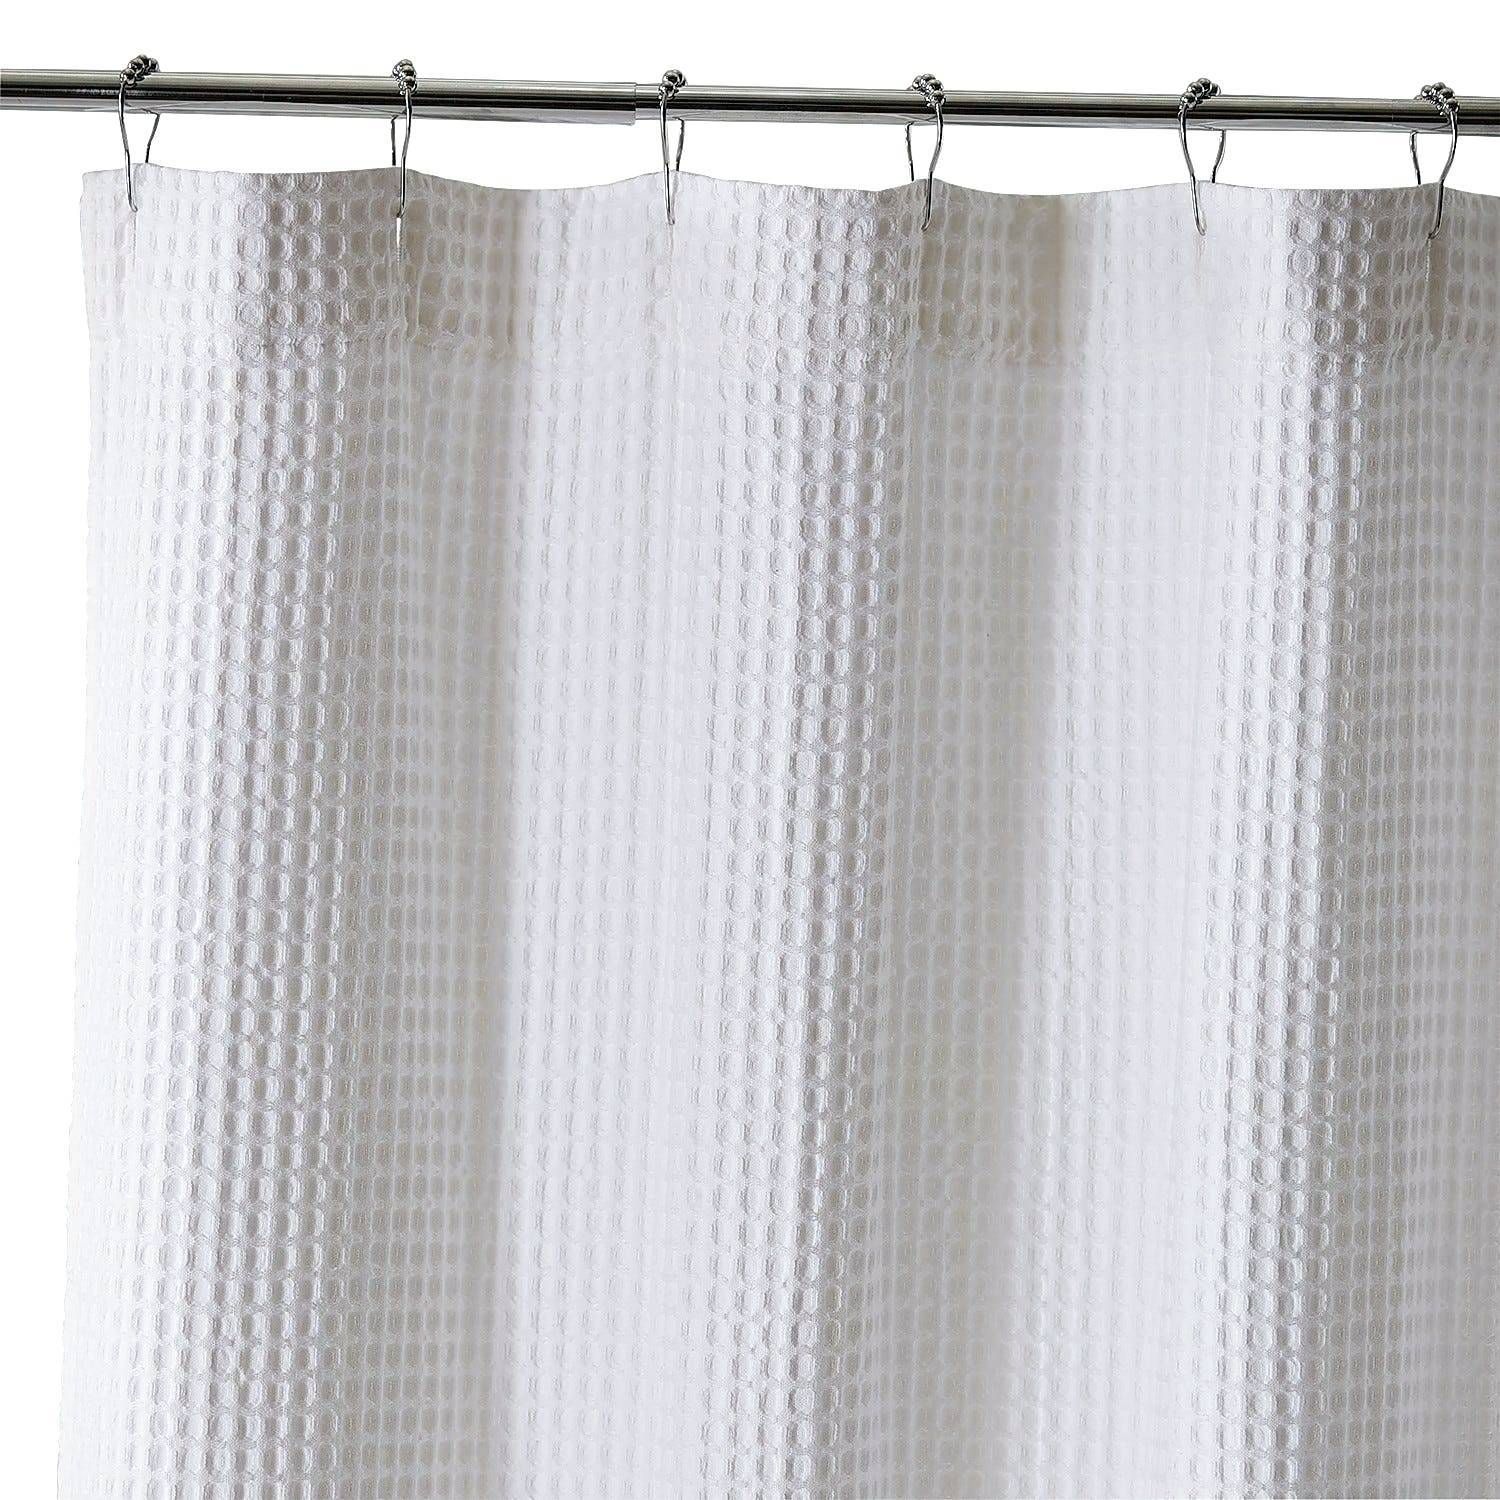 Wonderful White Cotton Ruffle Shower Curtain Bathrooms With Rod Pocket Cotton Solid Color Ruched Ruffle Kitchen Curtains (Photo 19 of 20)